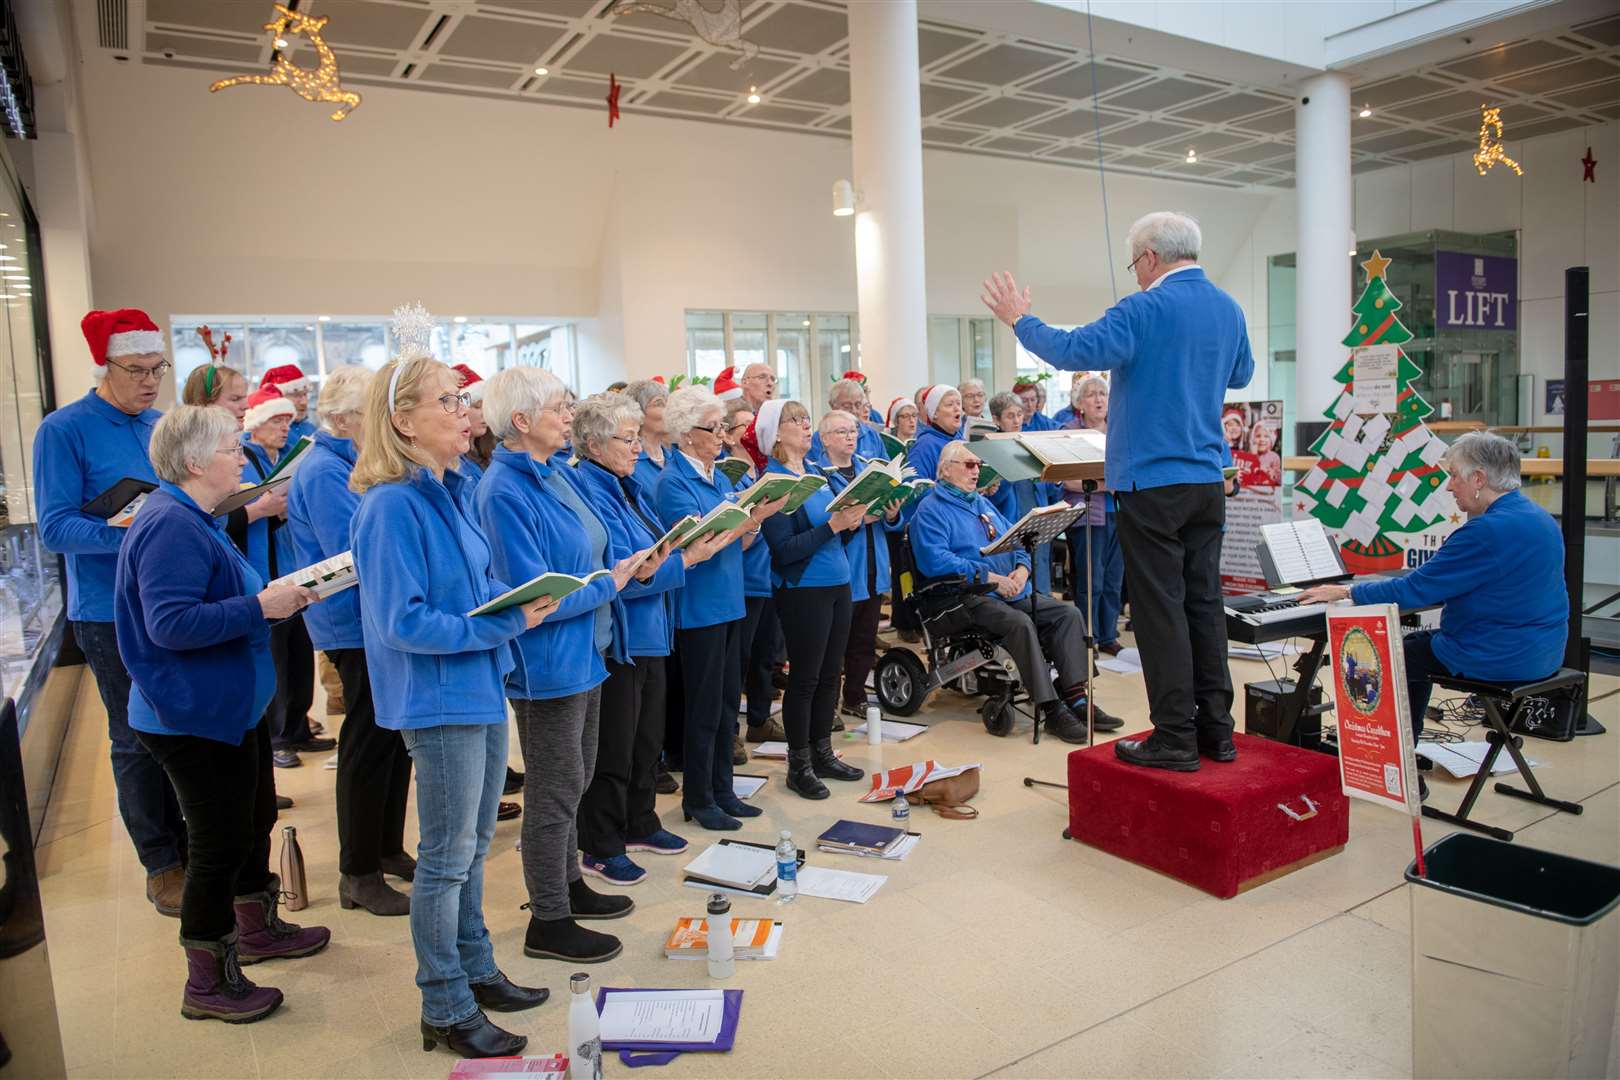 Inverness Choral Society, raised more than £1500 from a carolthon, with half of it going towards Highland mental health charity, Mikleysline.